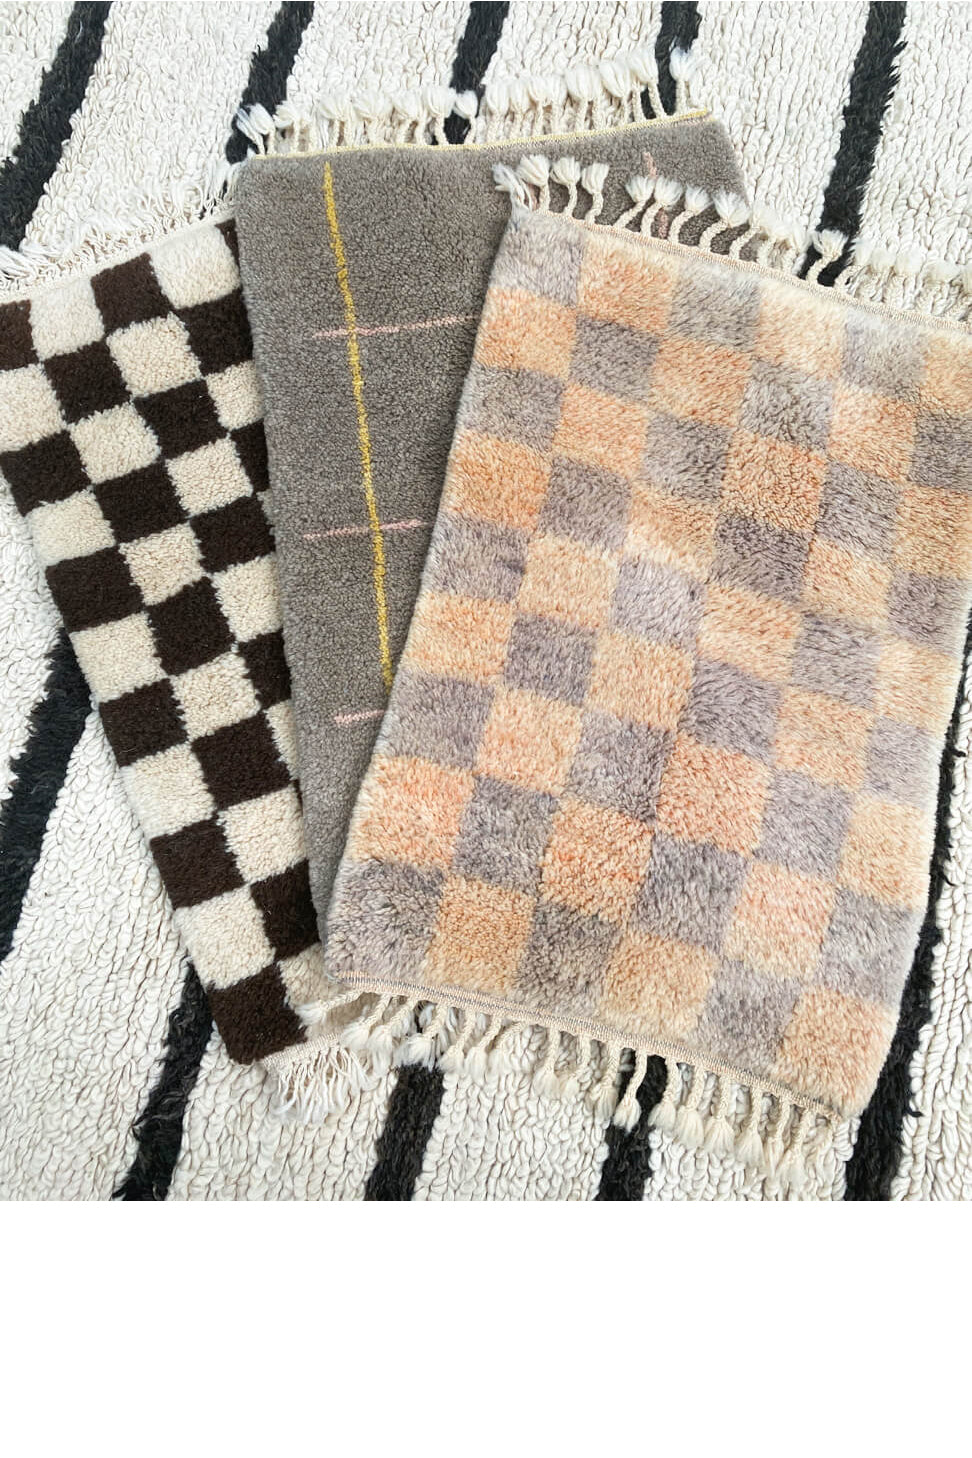 Mini Beni rugs small rugs for small spaces